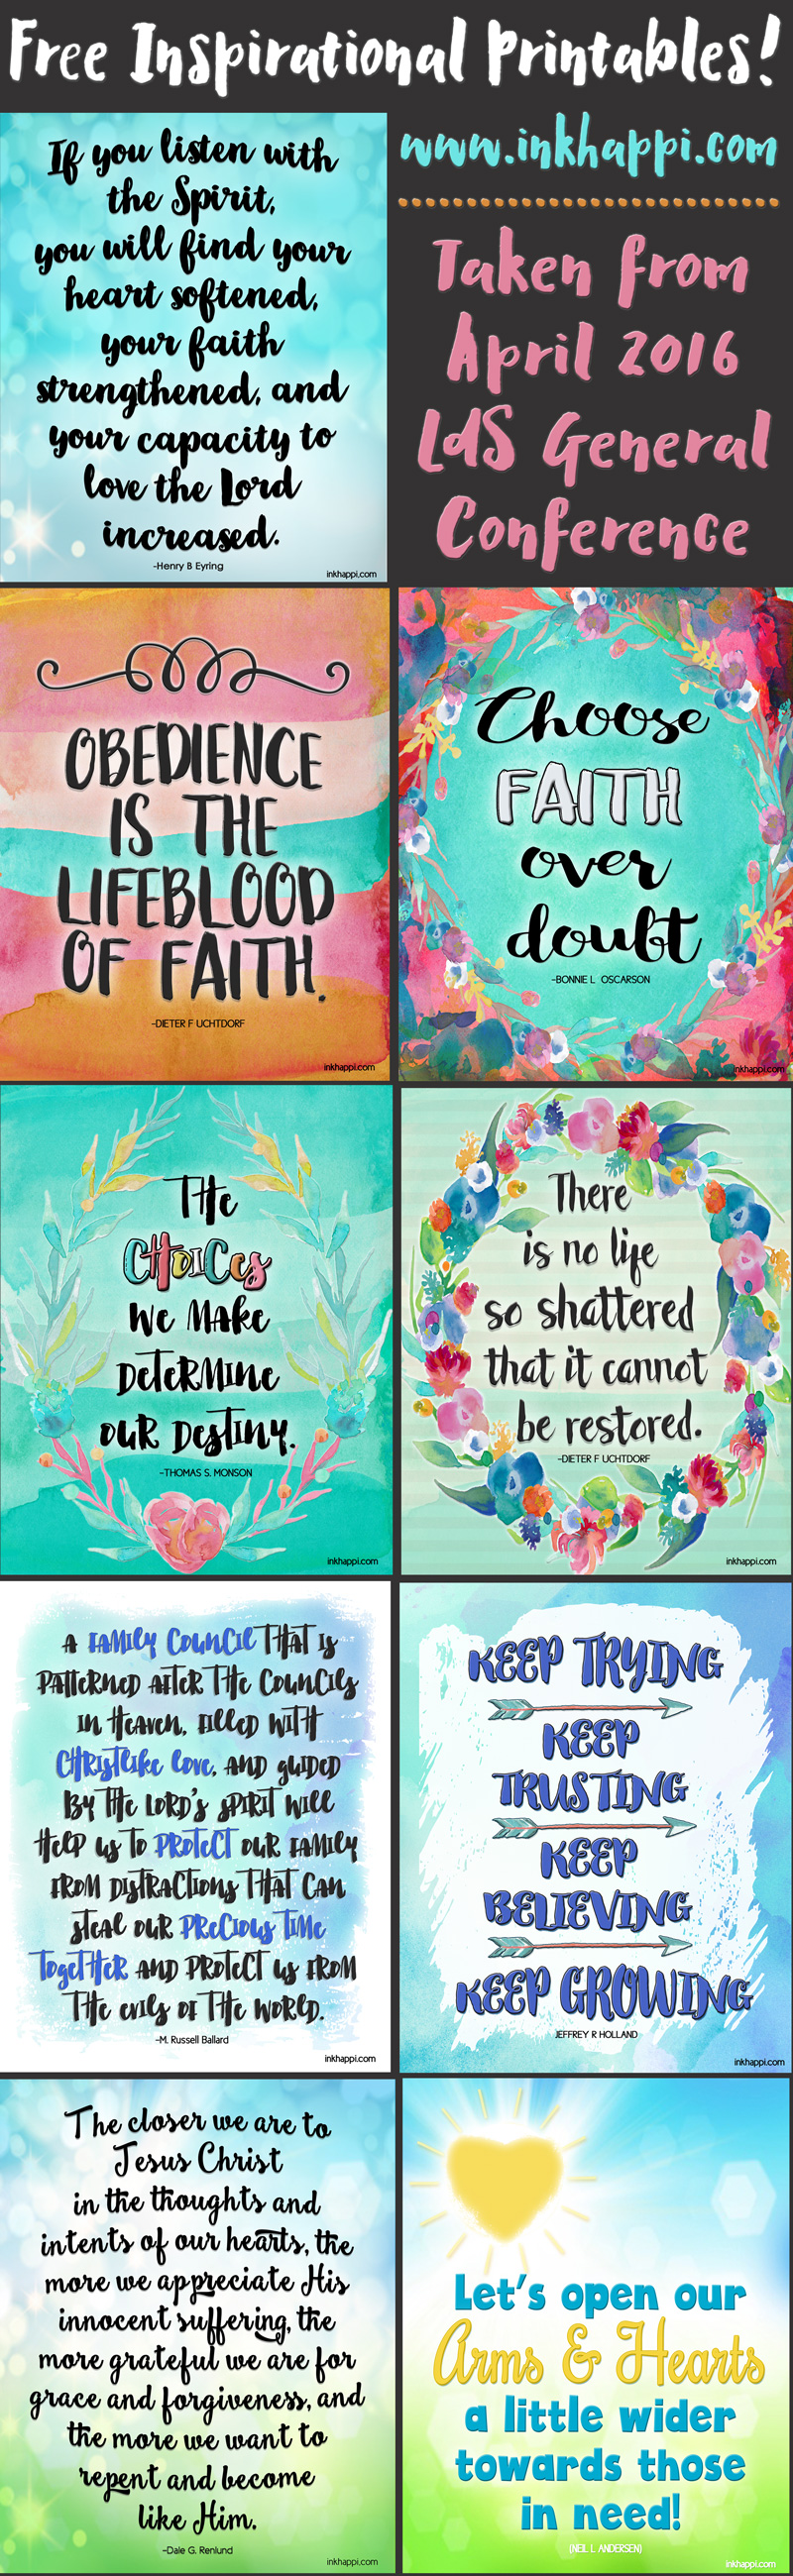 Inspirational Printables from LDS General Conference - inkhappi